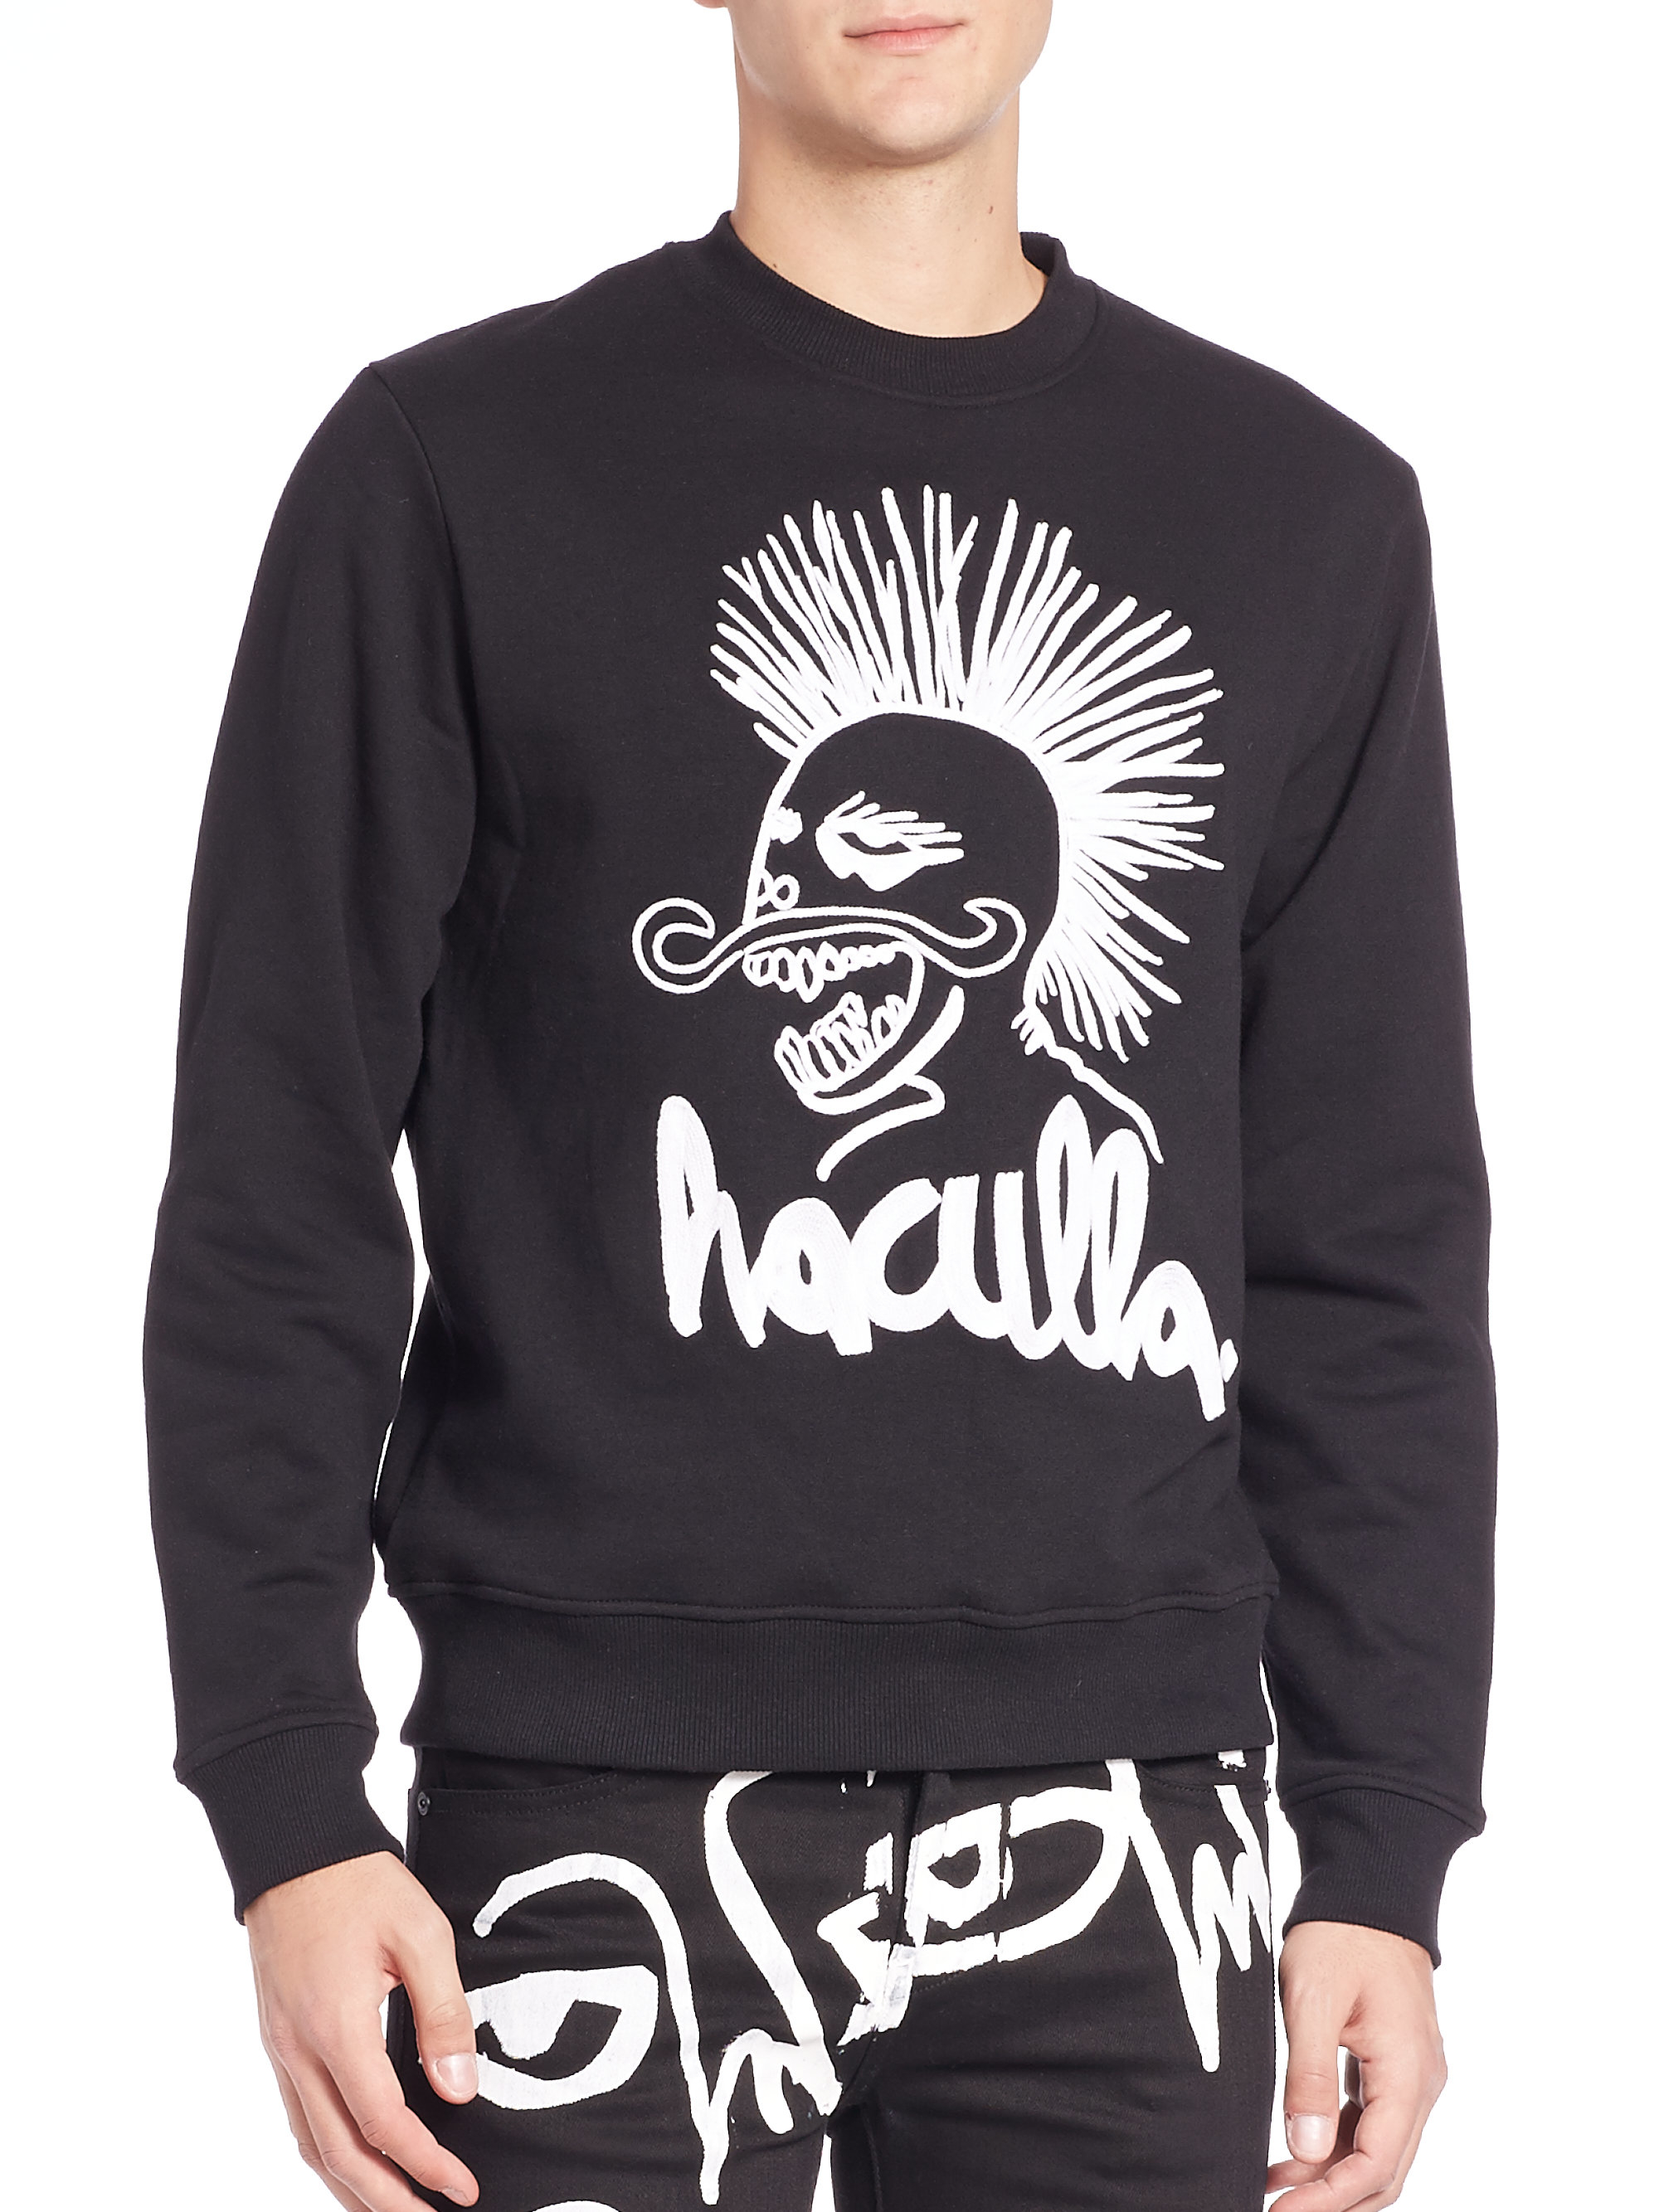 Lyst - Haculla Embroidered Doodle Sweatshirt in Black for Men